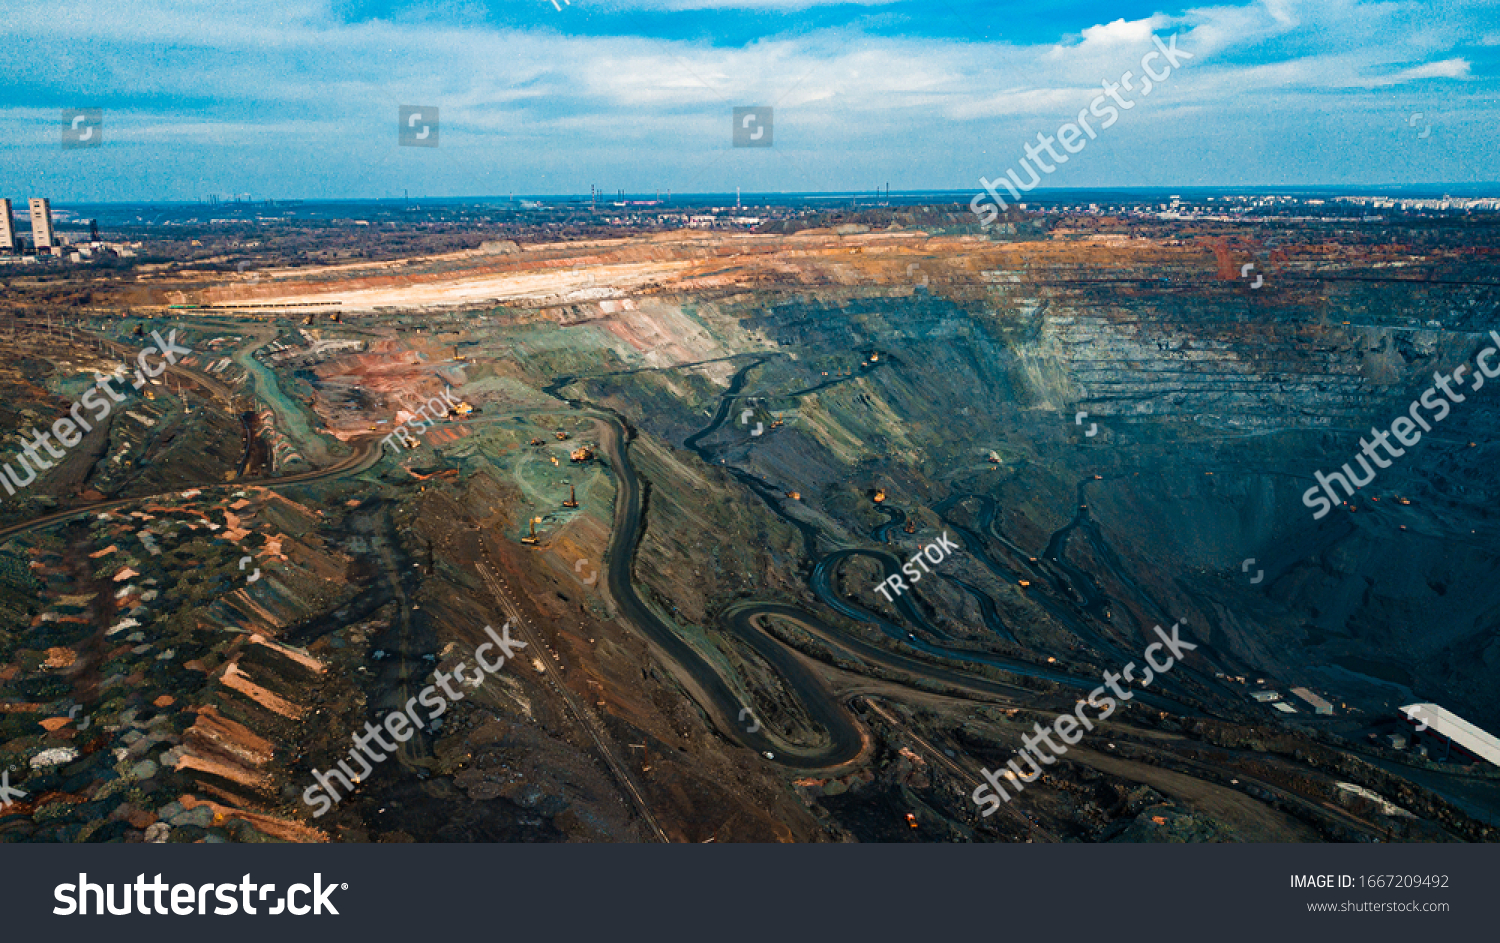 Aerial view of the Iron ore mining, Panorama of an open-cast mine extracting iron ore, preparing for blasting in a quarry mining iron ore, Explosive works on open pit #1667209492